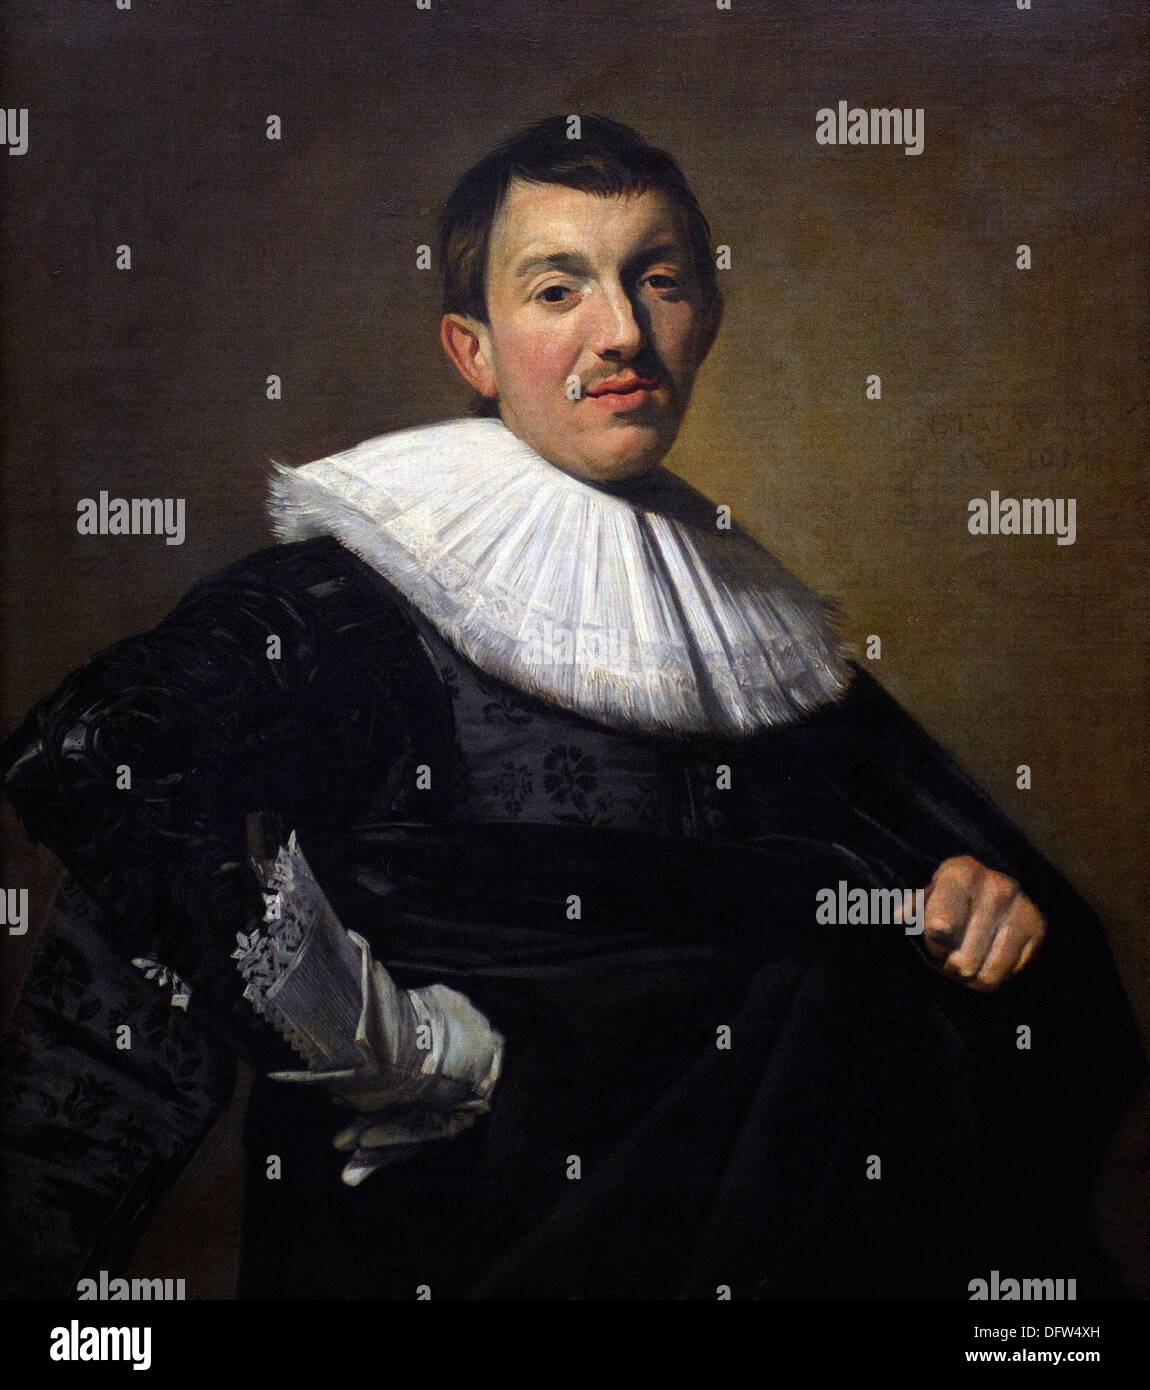 Frans HALS - Portrait of a man - 1634 - Museum of Fine Arts - Budapest, Hungary. Stock Photo